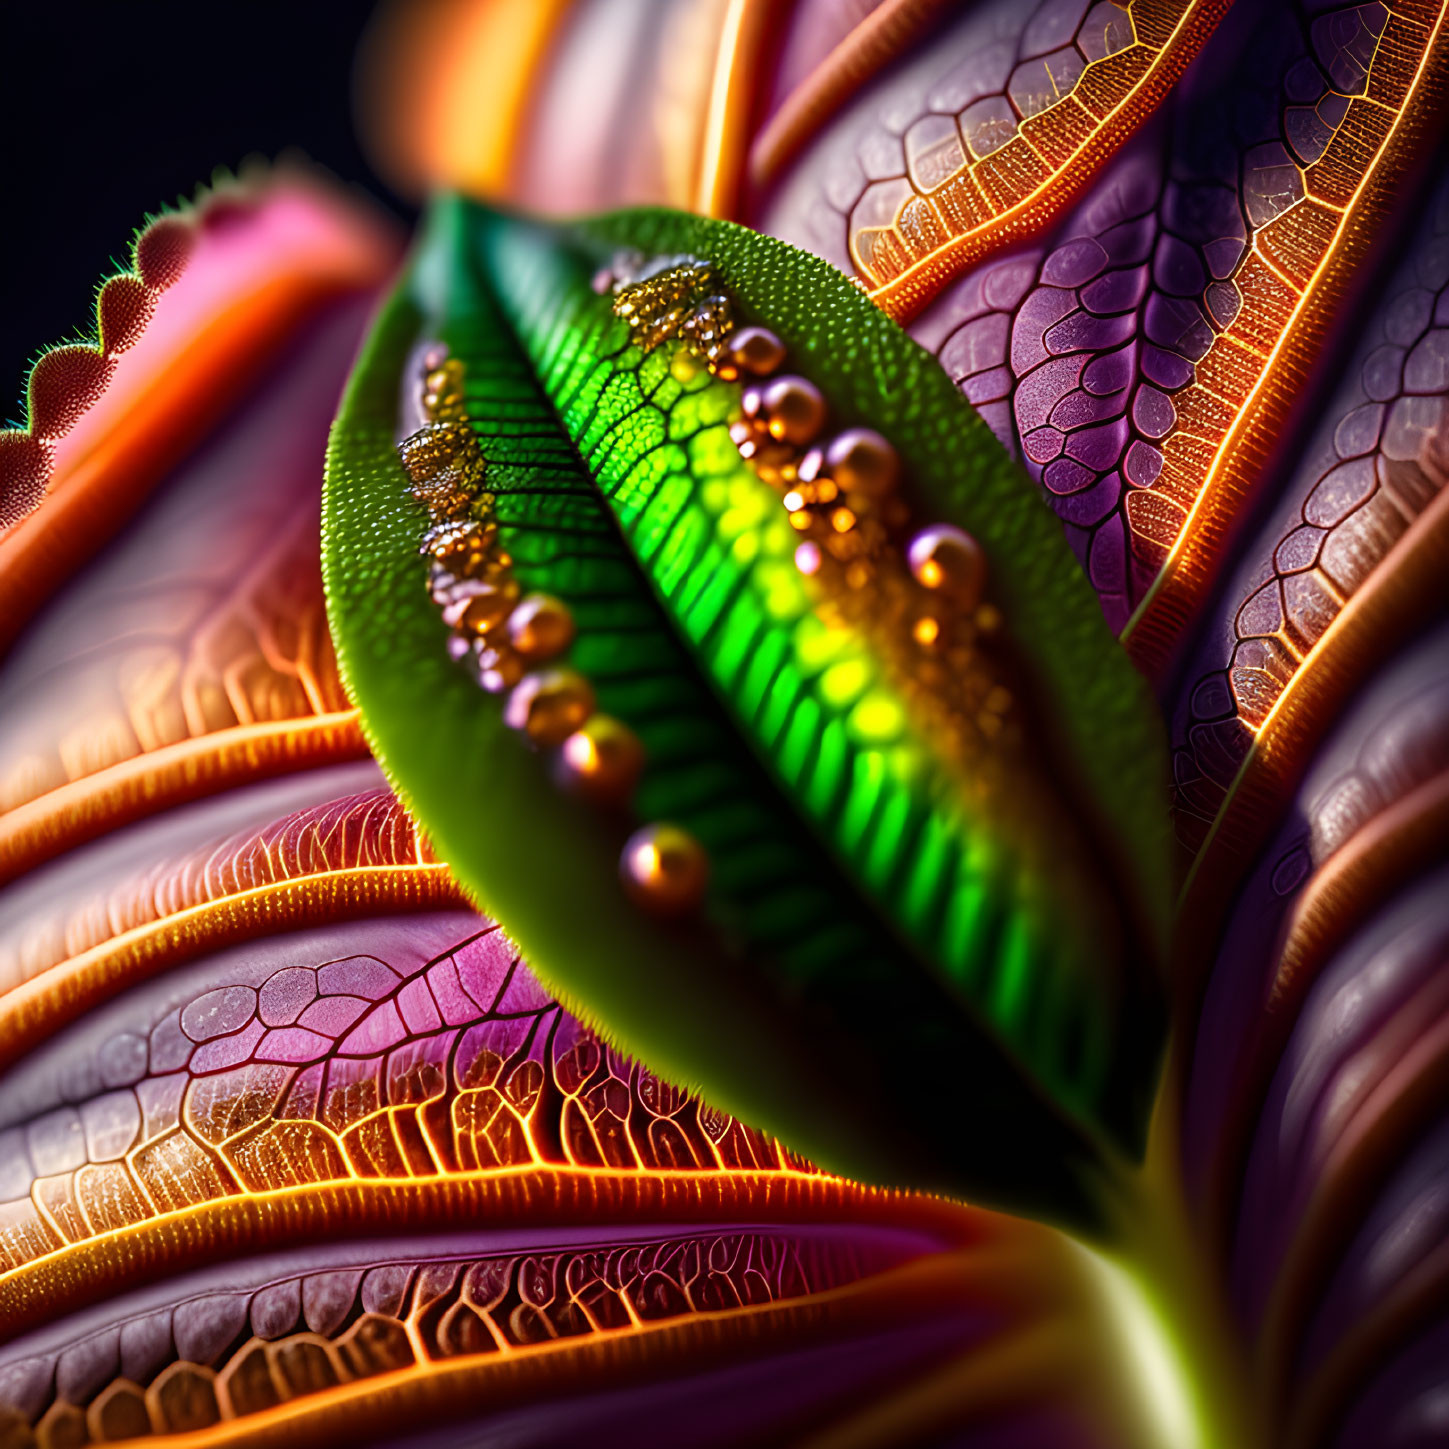 Detailed macro shot of vibrant leaves with intricate veins, dewdrops, and green to purple gradient